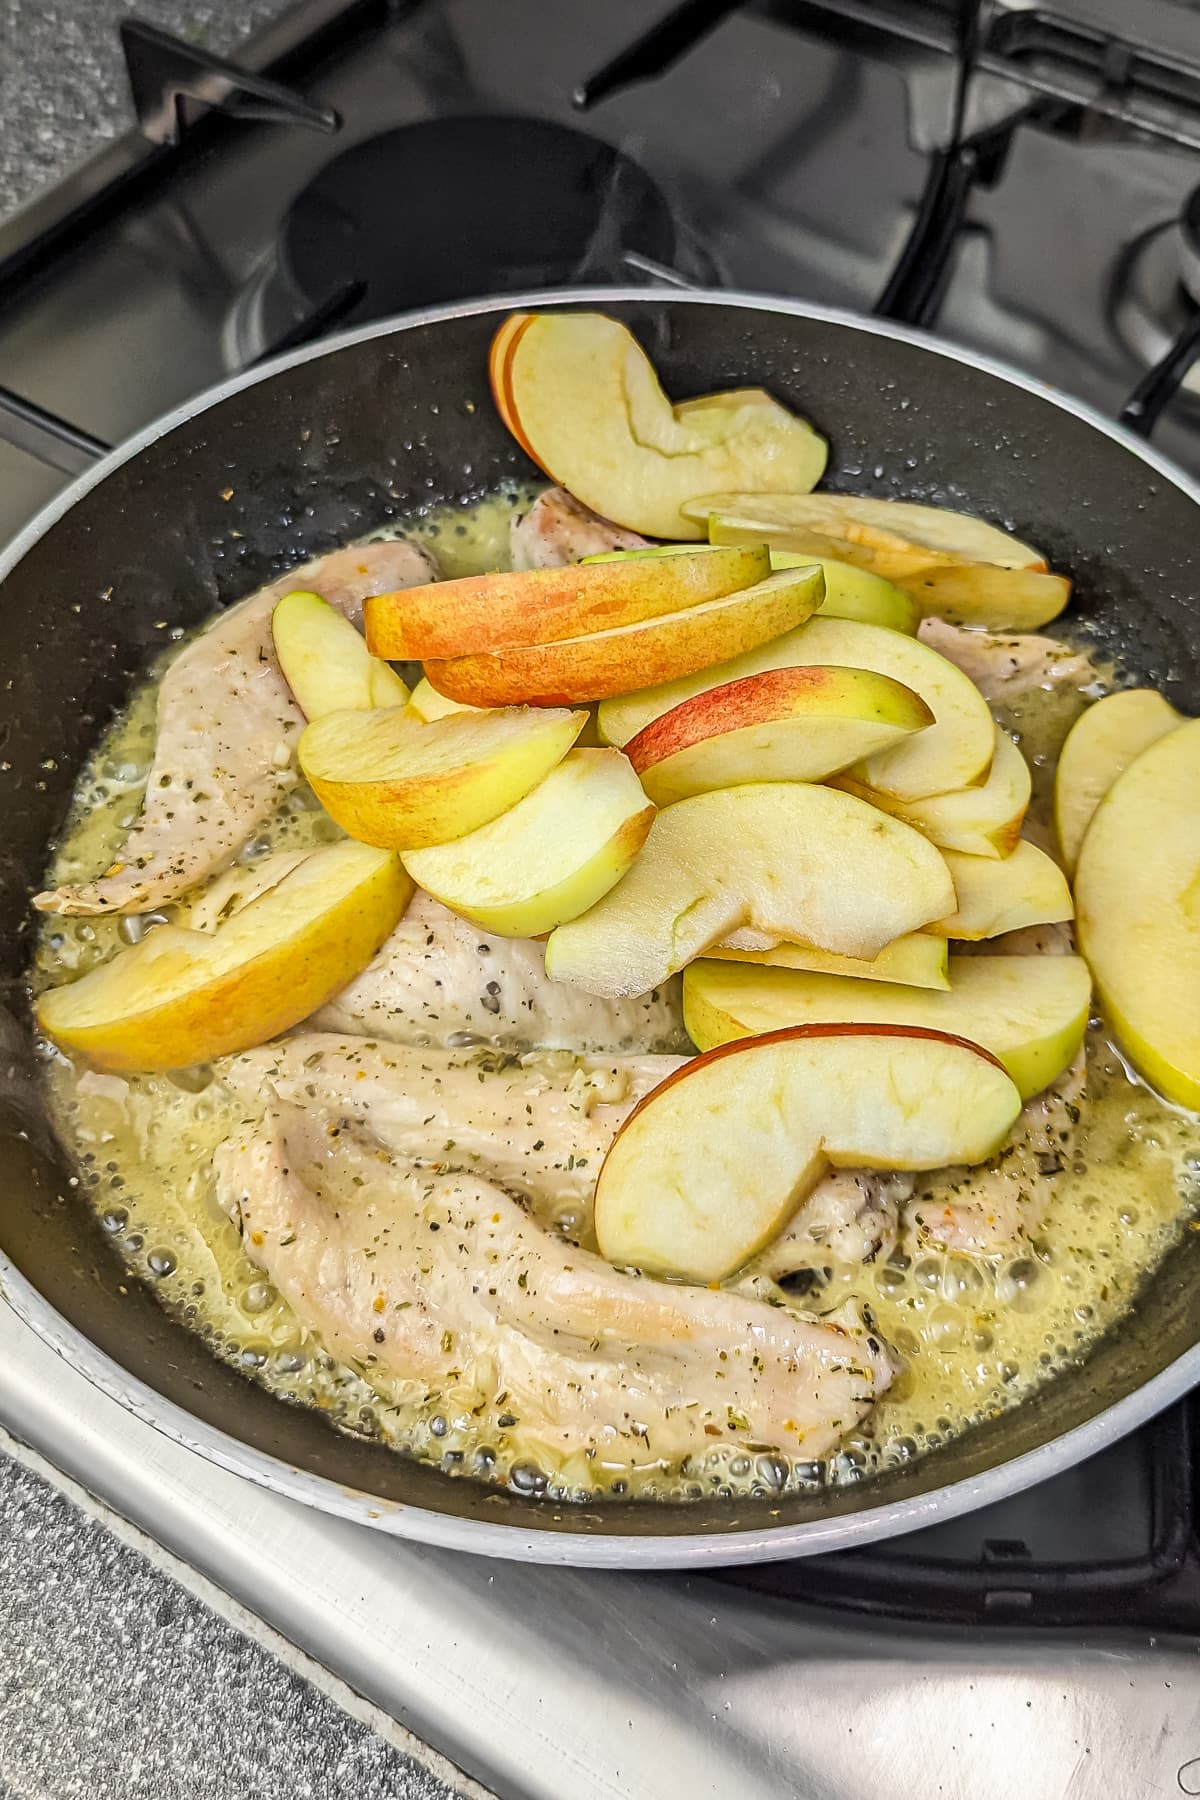 Sliced apples added to the skillet with the chicken and cooking liquids.